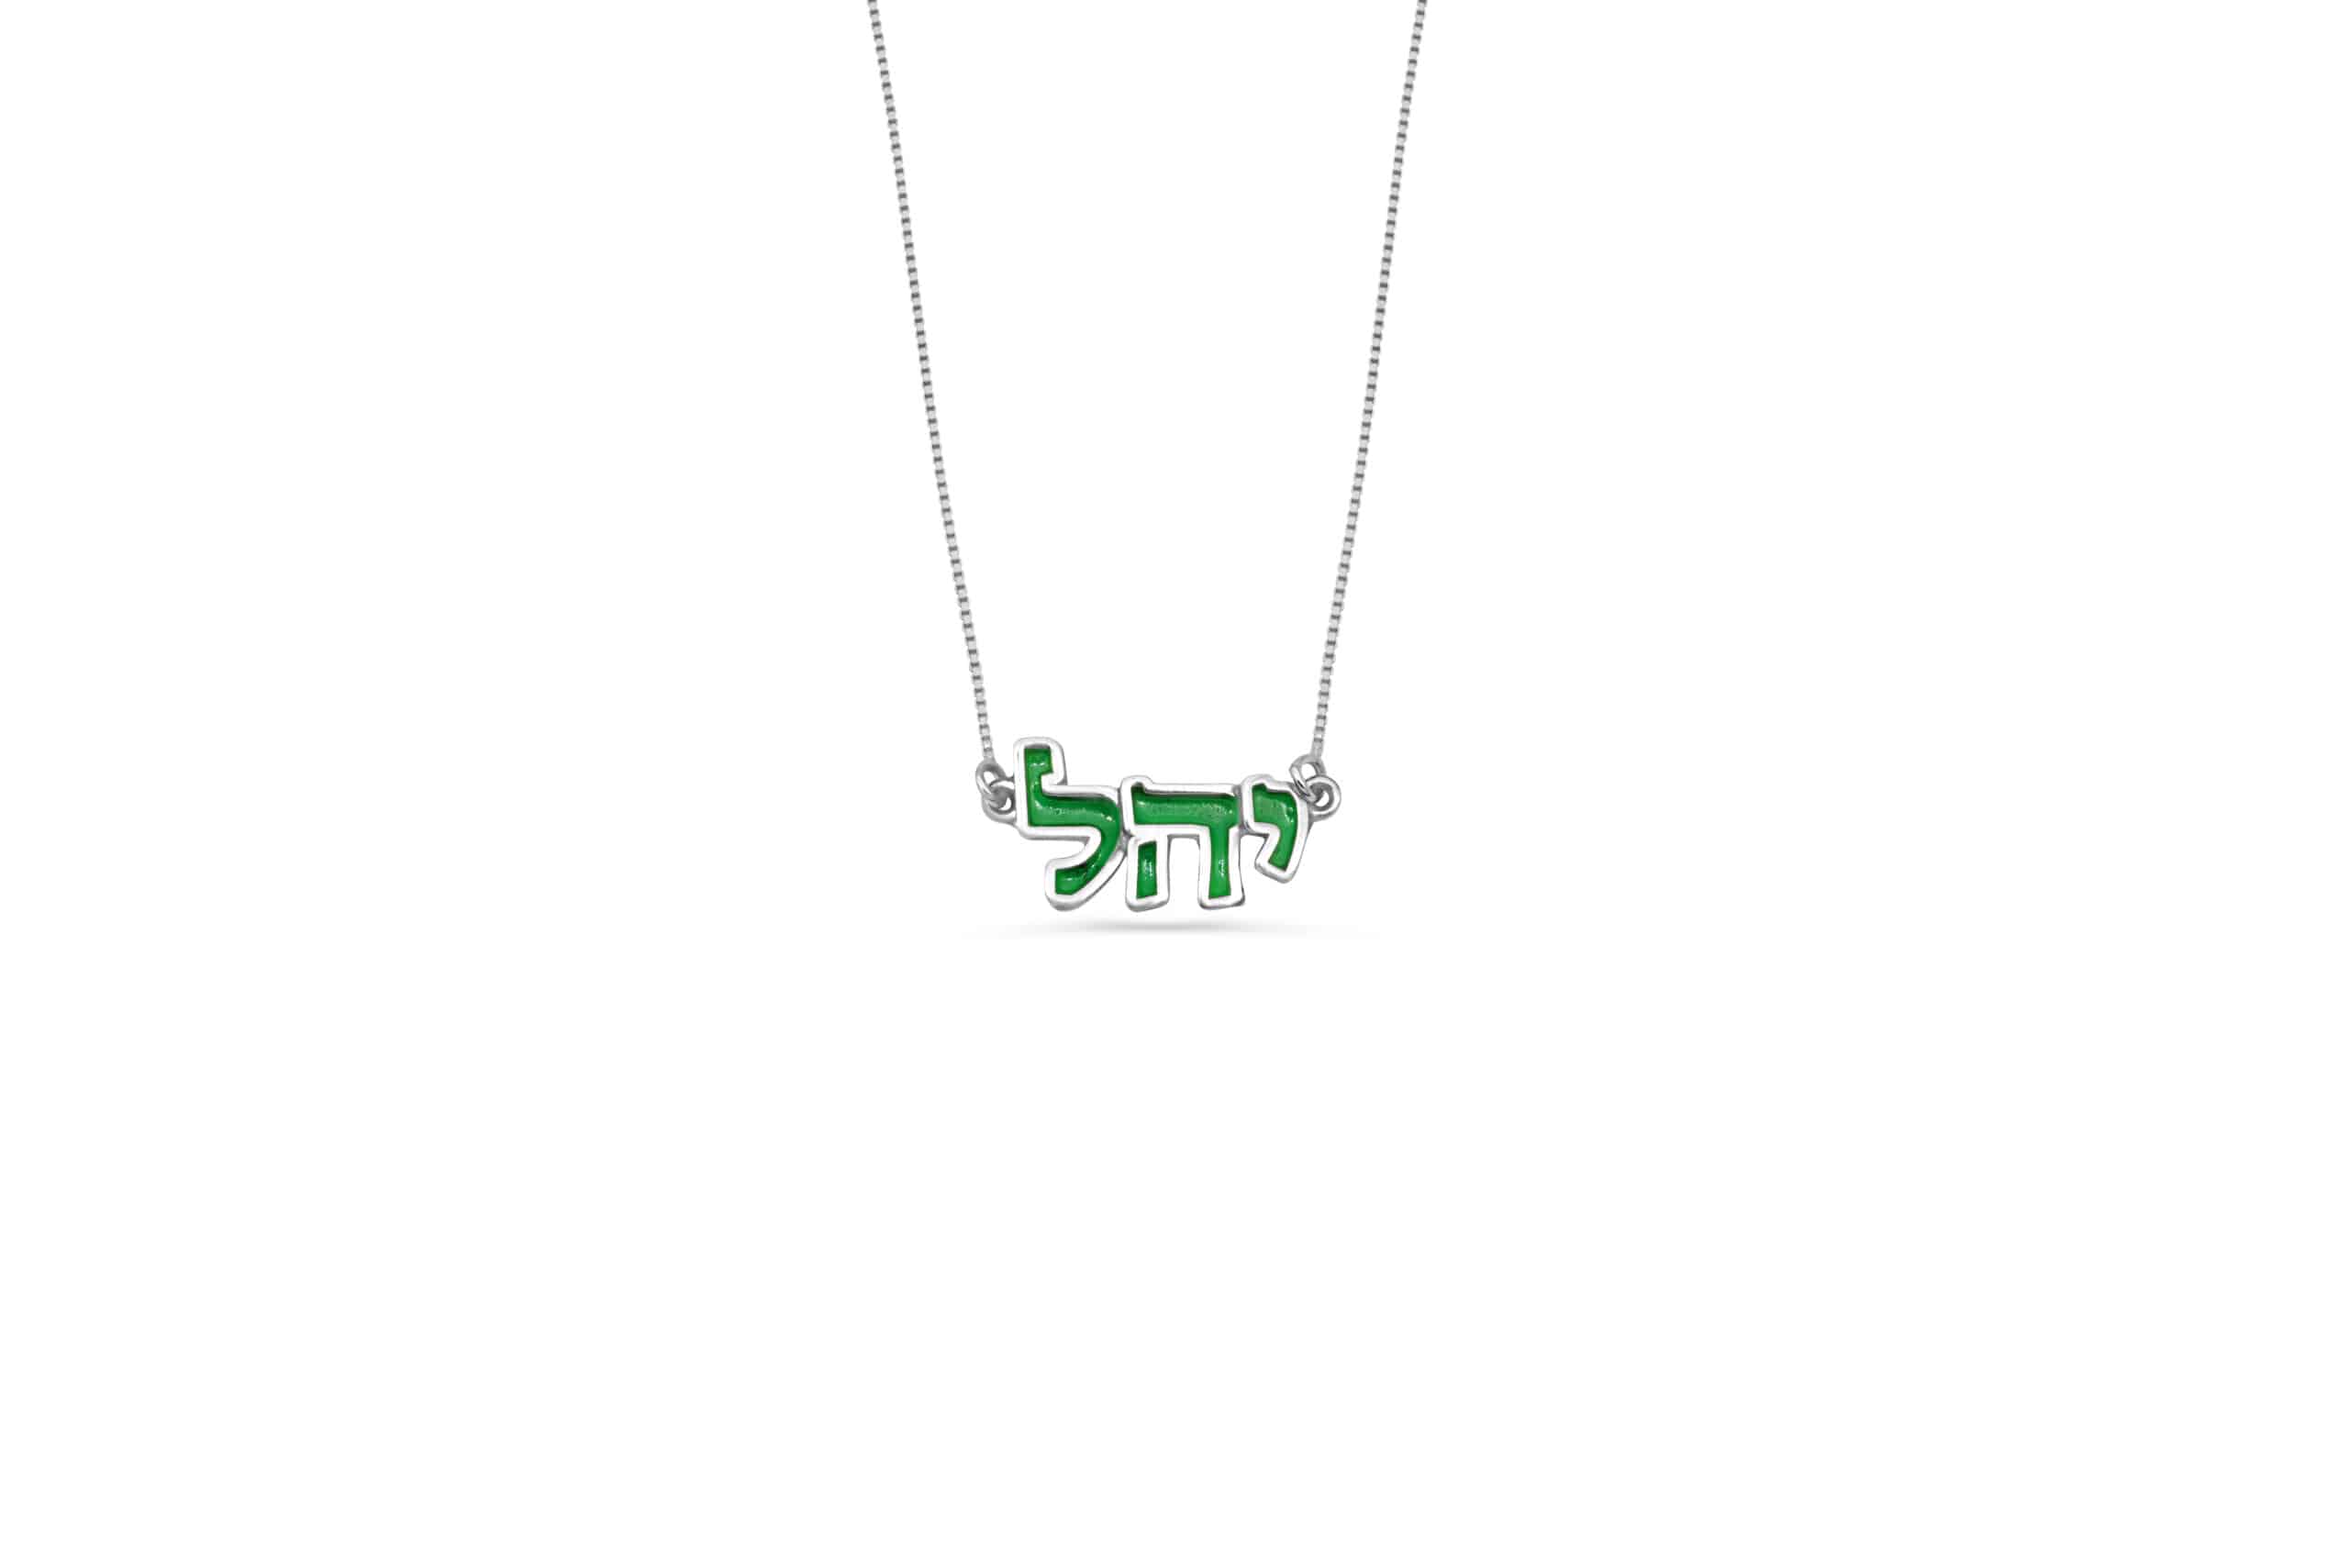 Hebrew Name Necklace with Cold Enamel